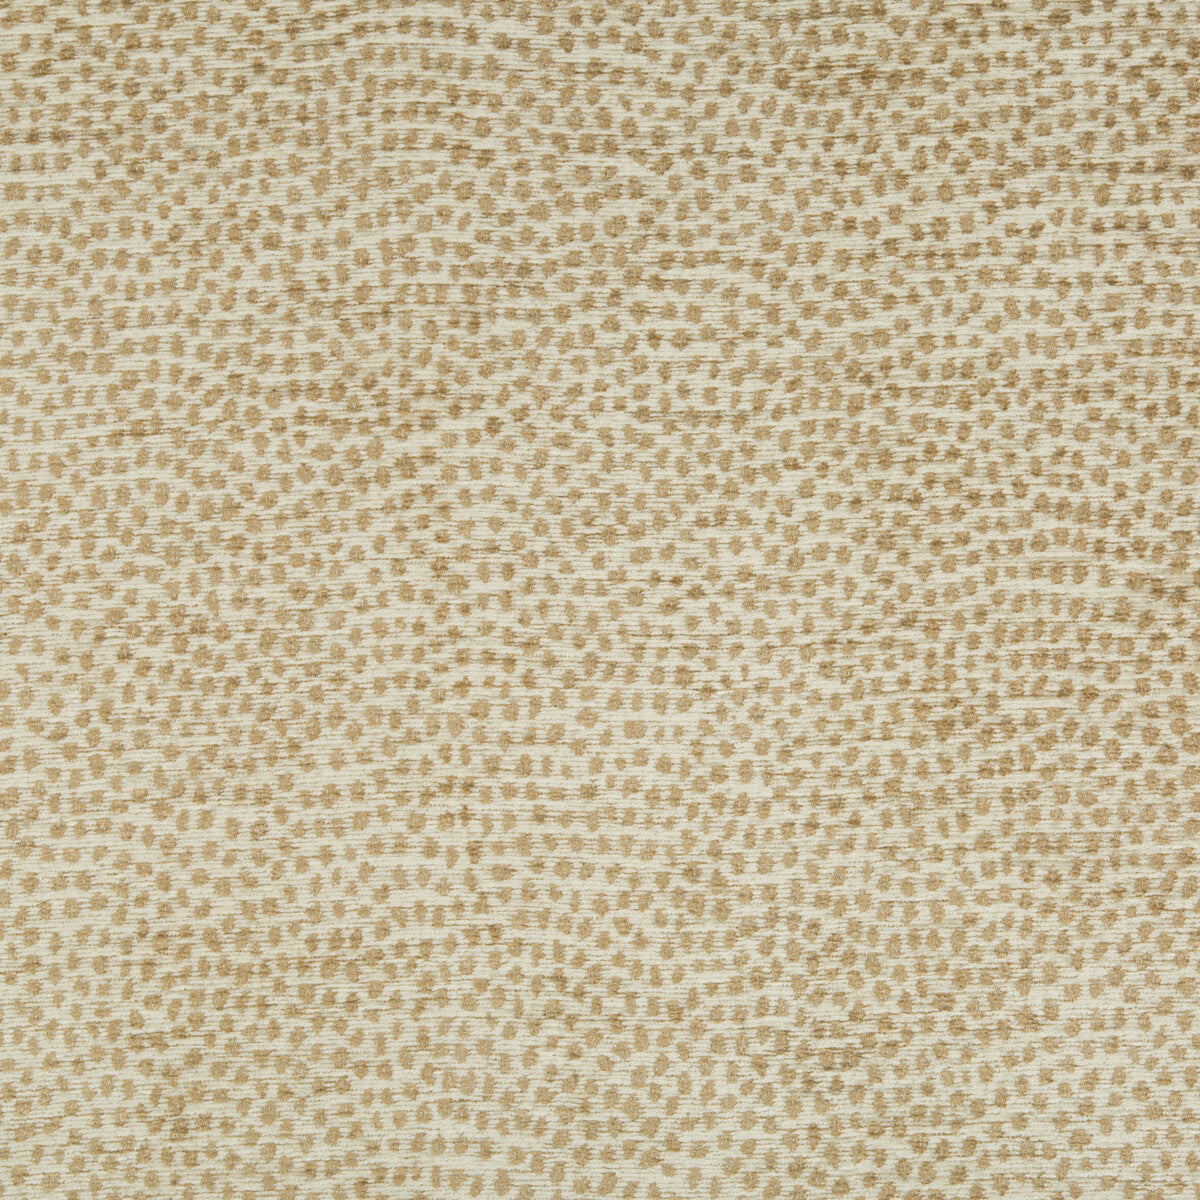 Kravet Design fabric in 34971-4 color - pattern 34971.4.0 - by Kravet Design in the Performance Crypton Home collection